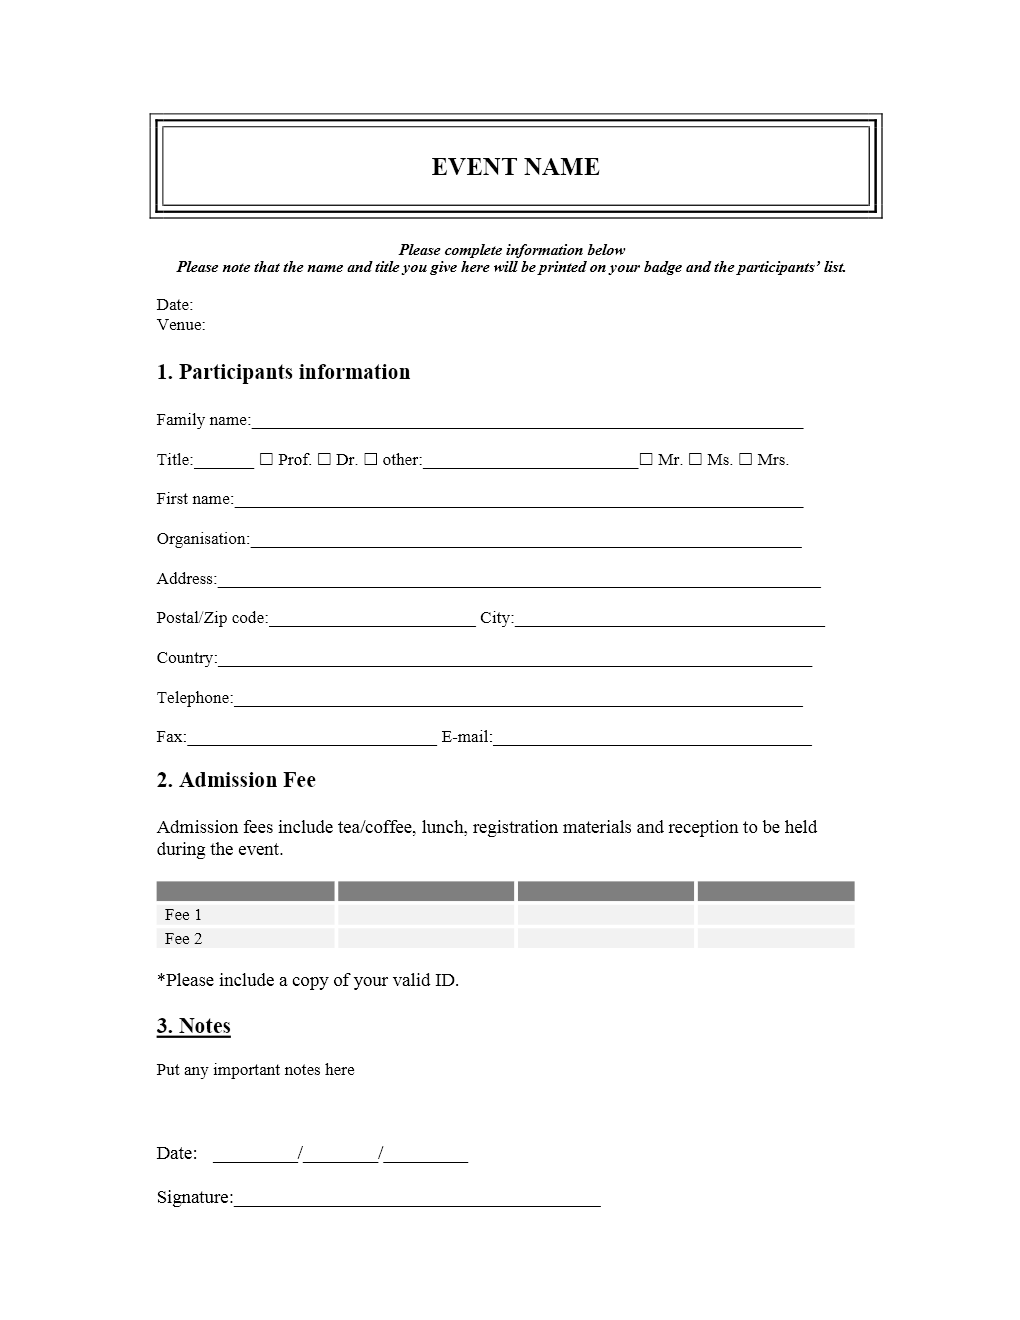 registration forms templates   April.onthemarch.co